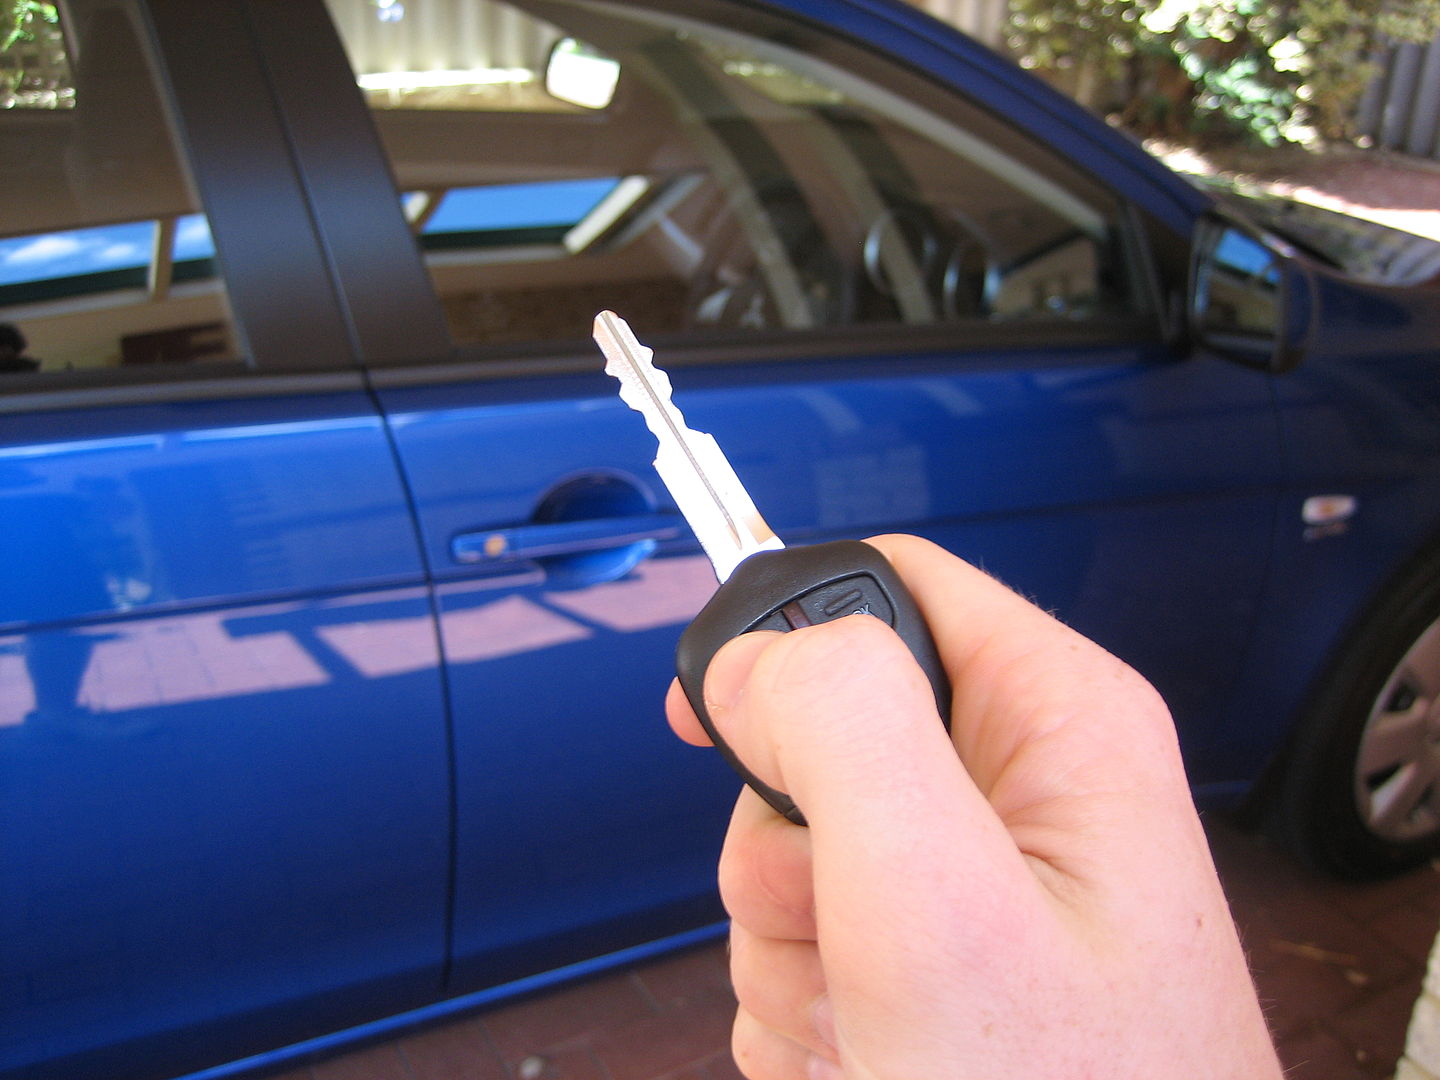 A key fob in action.